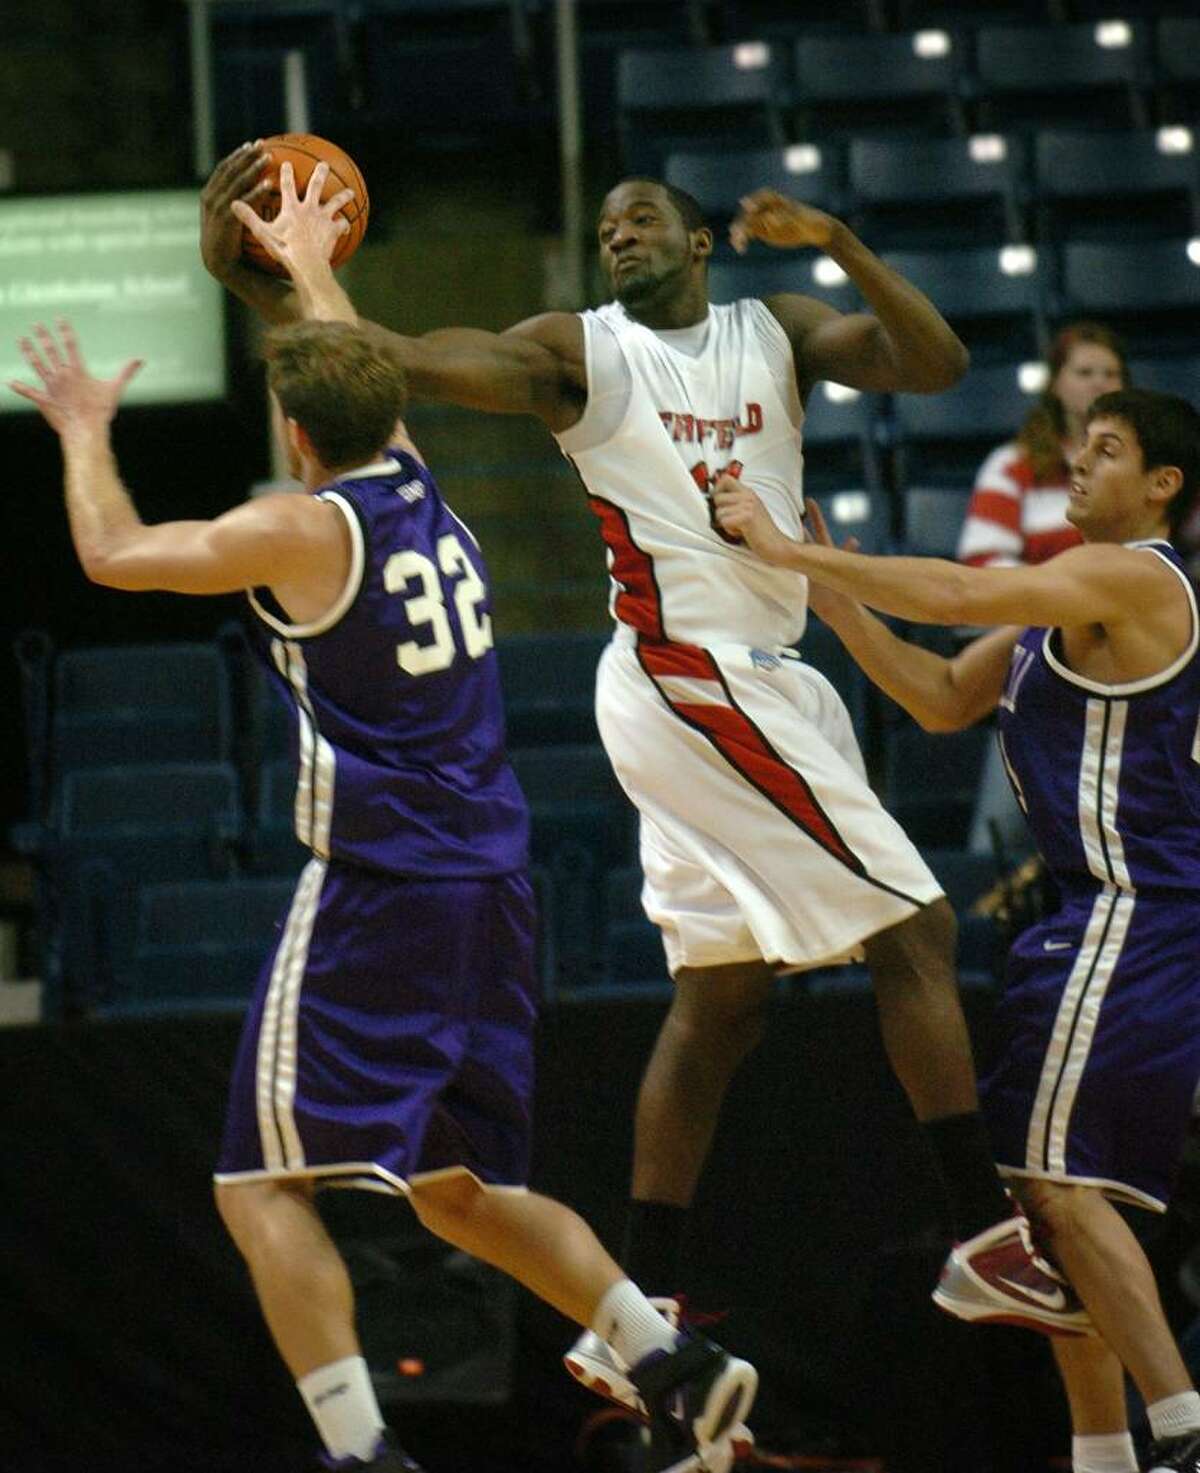 Fairfield's Anthony Johnson grabs a rebound between two Stonehill defenders during a recent game at the Arena at Harbor Yard in Bridgeport.